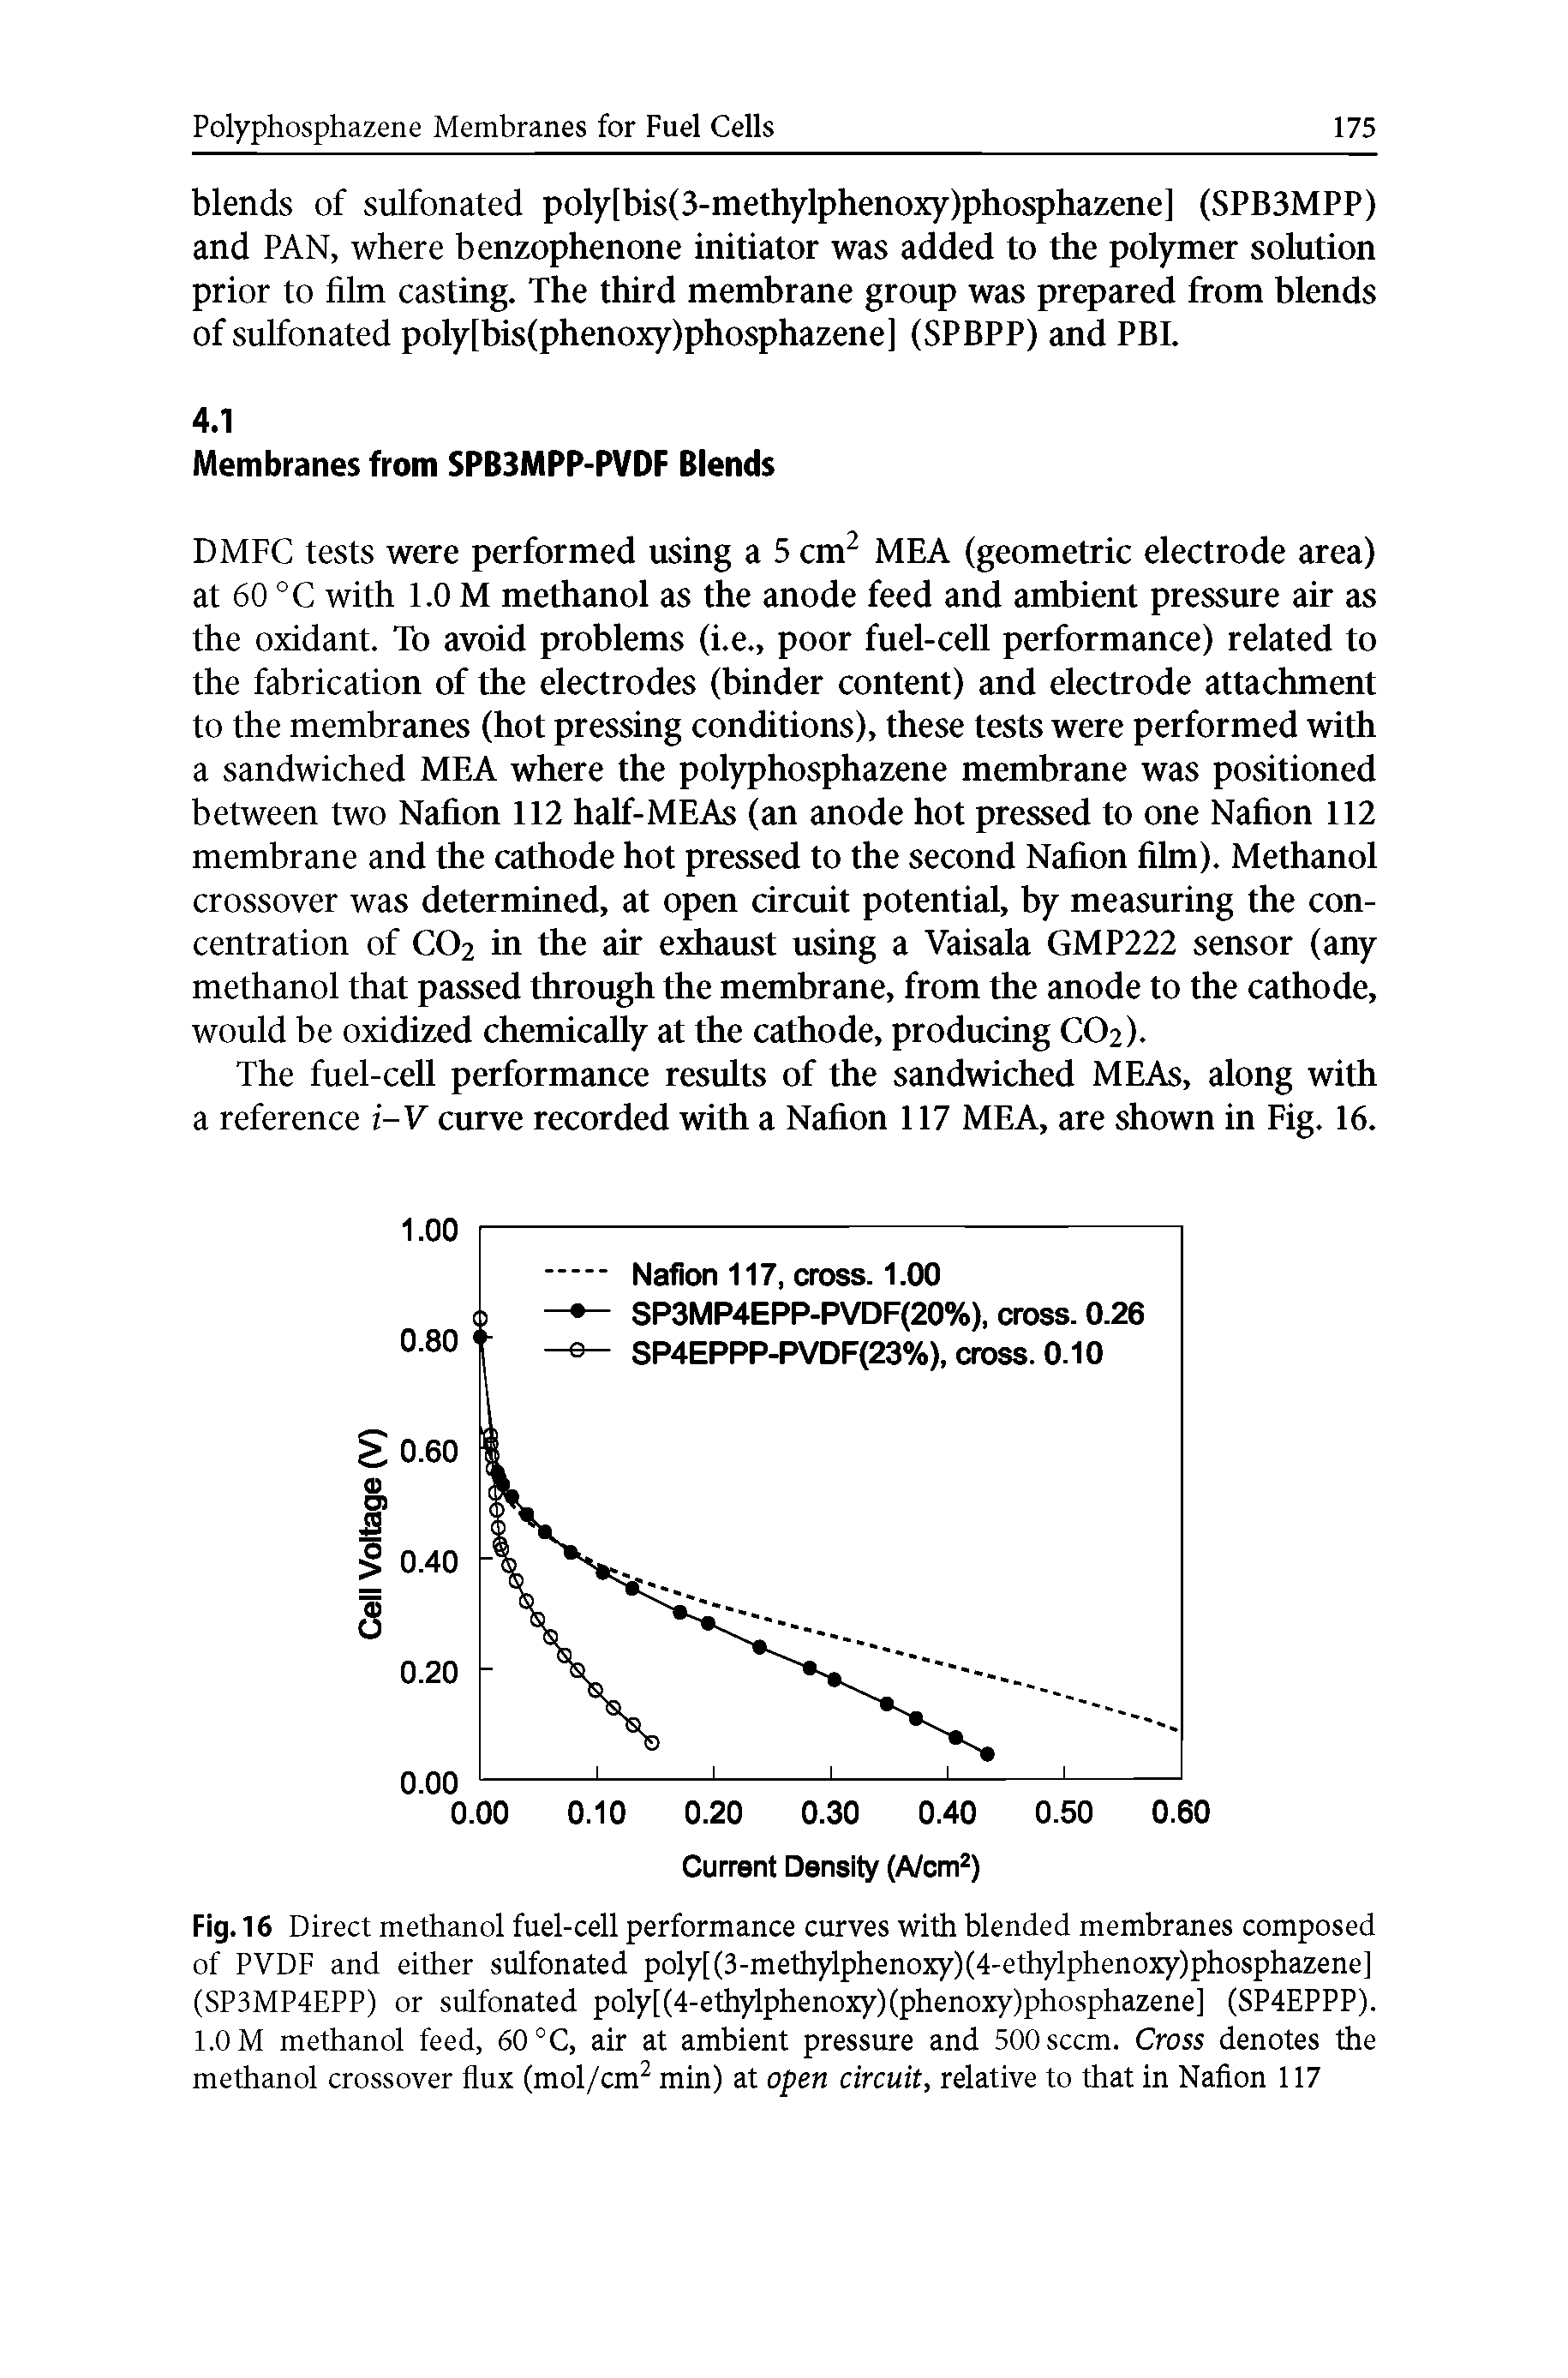 Fig. 16 Direct methanol fuel-cell performance curves with blended membranes composed of PVDF and either sulfonated poly[(3-methylphenoxy)(4-ethylphenoxy)phosphazene] (SP3MP4EPP) or sulfonated poly[(4-ethylphenoxy)(phenoxy)phosphazene] (SP4EPPP). 1.0 M methanol feed, 60 °C, air at ambient pressure and 500 seem. Cross denotes the methanol crossover flux (mol/cm min) at open circuit, relative to that in Nafion 117...